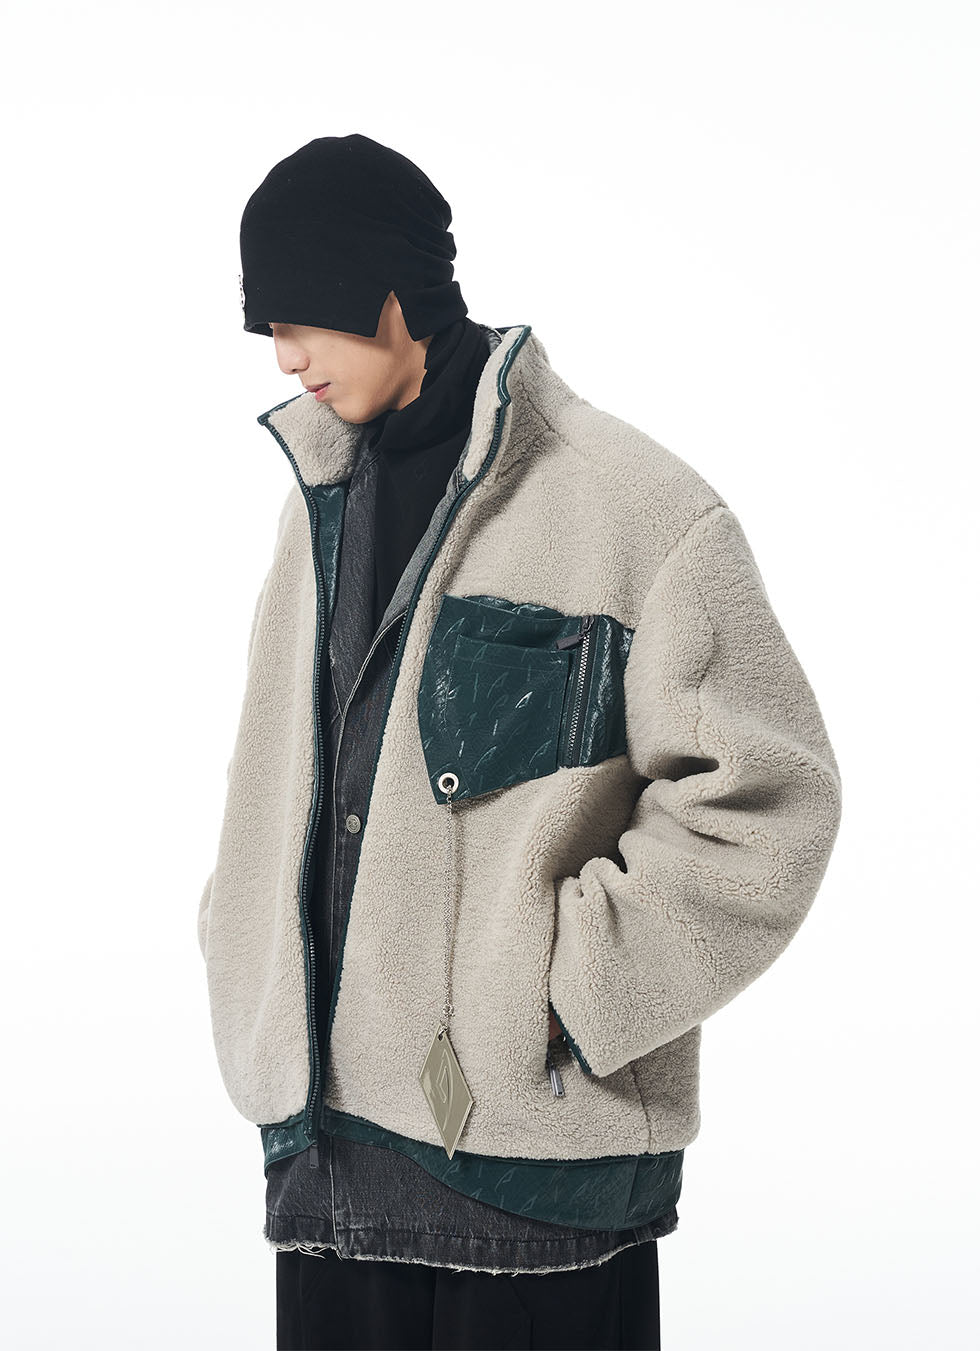 Sherpa jacket with removable metal label